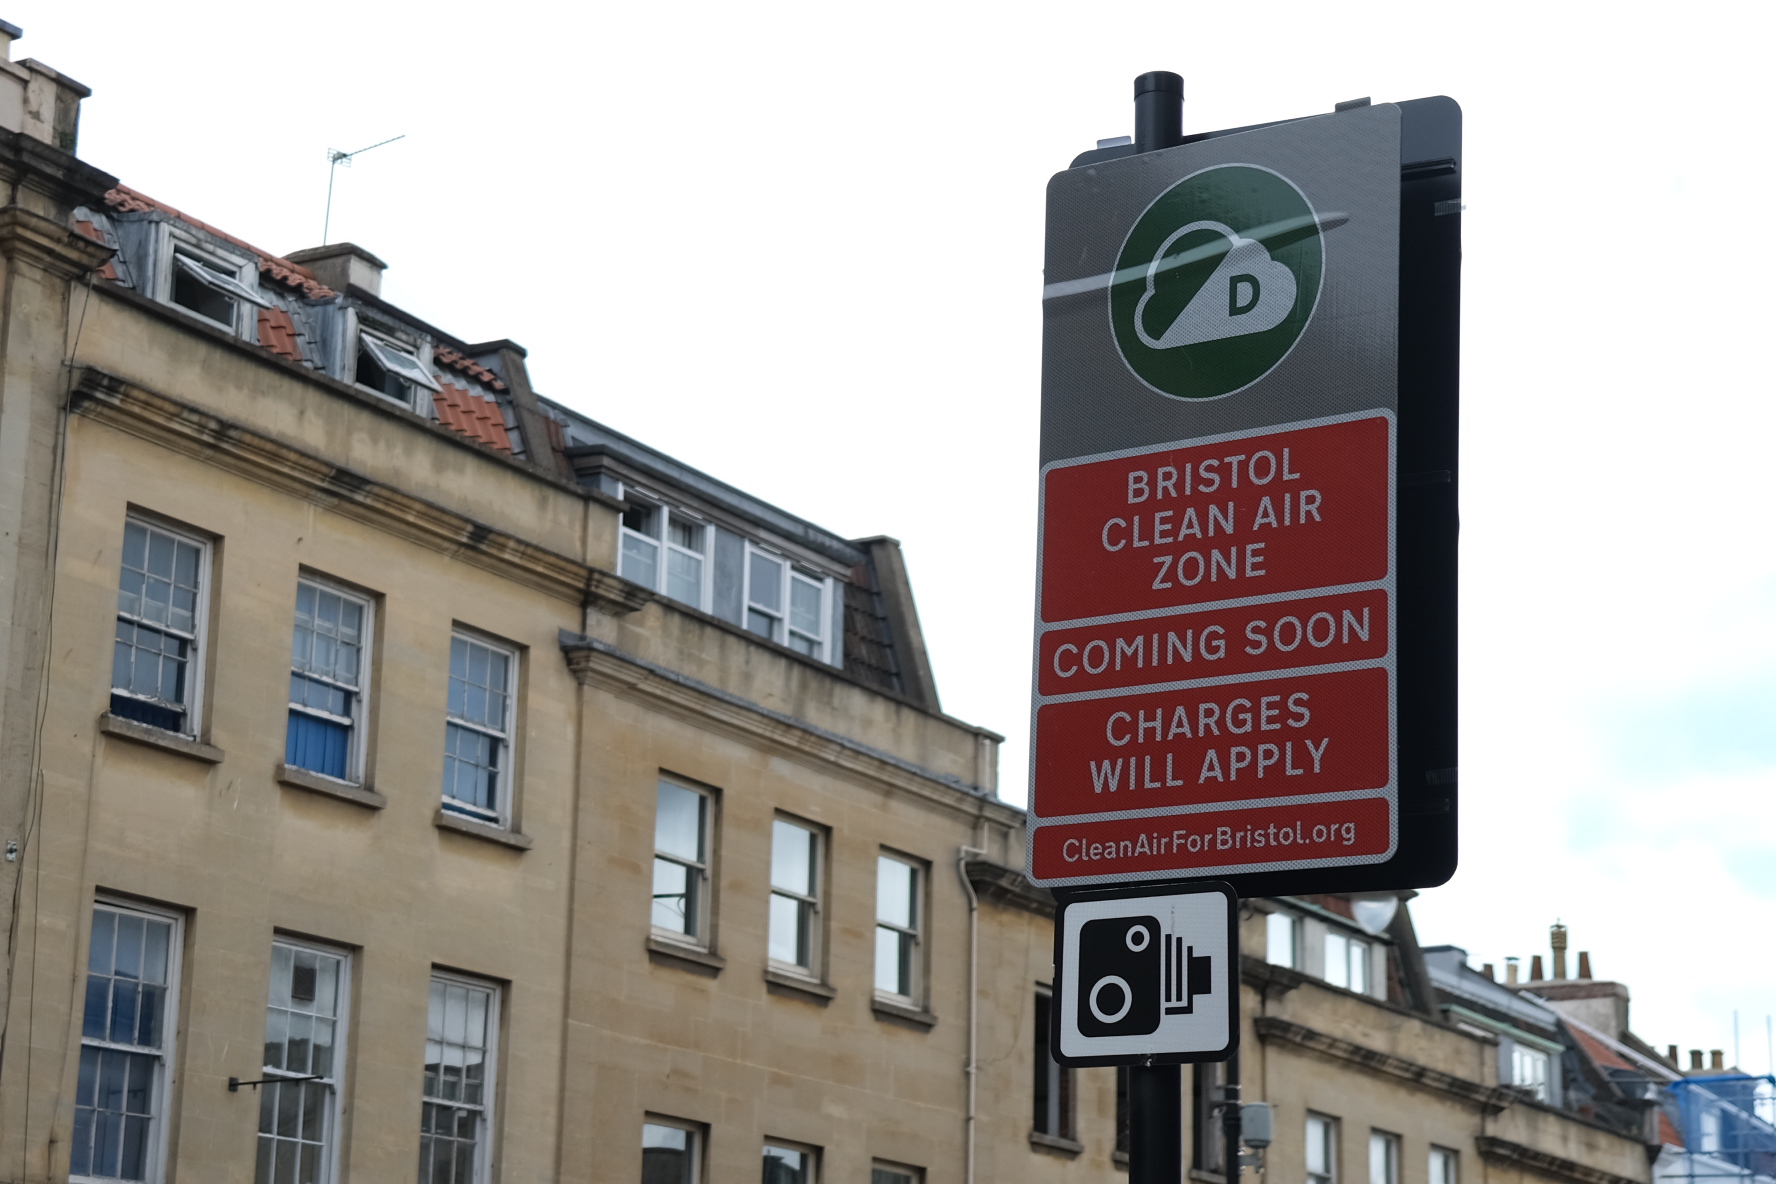 A Bristol Clean Air Zone sign with ‘coming soon’ and ‘charges apply’ written on it, with sky and buildings in the background.